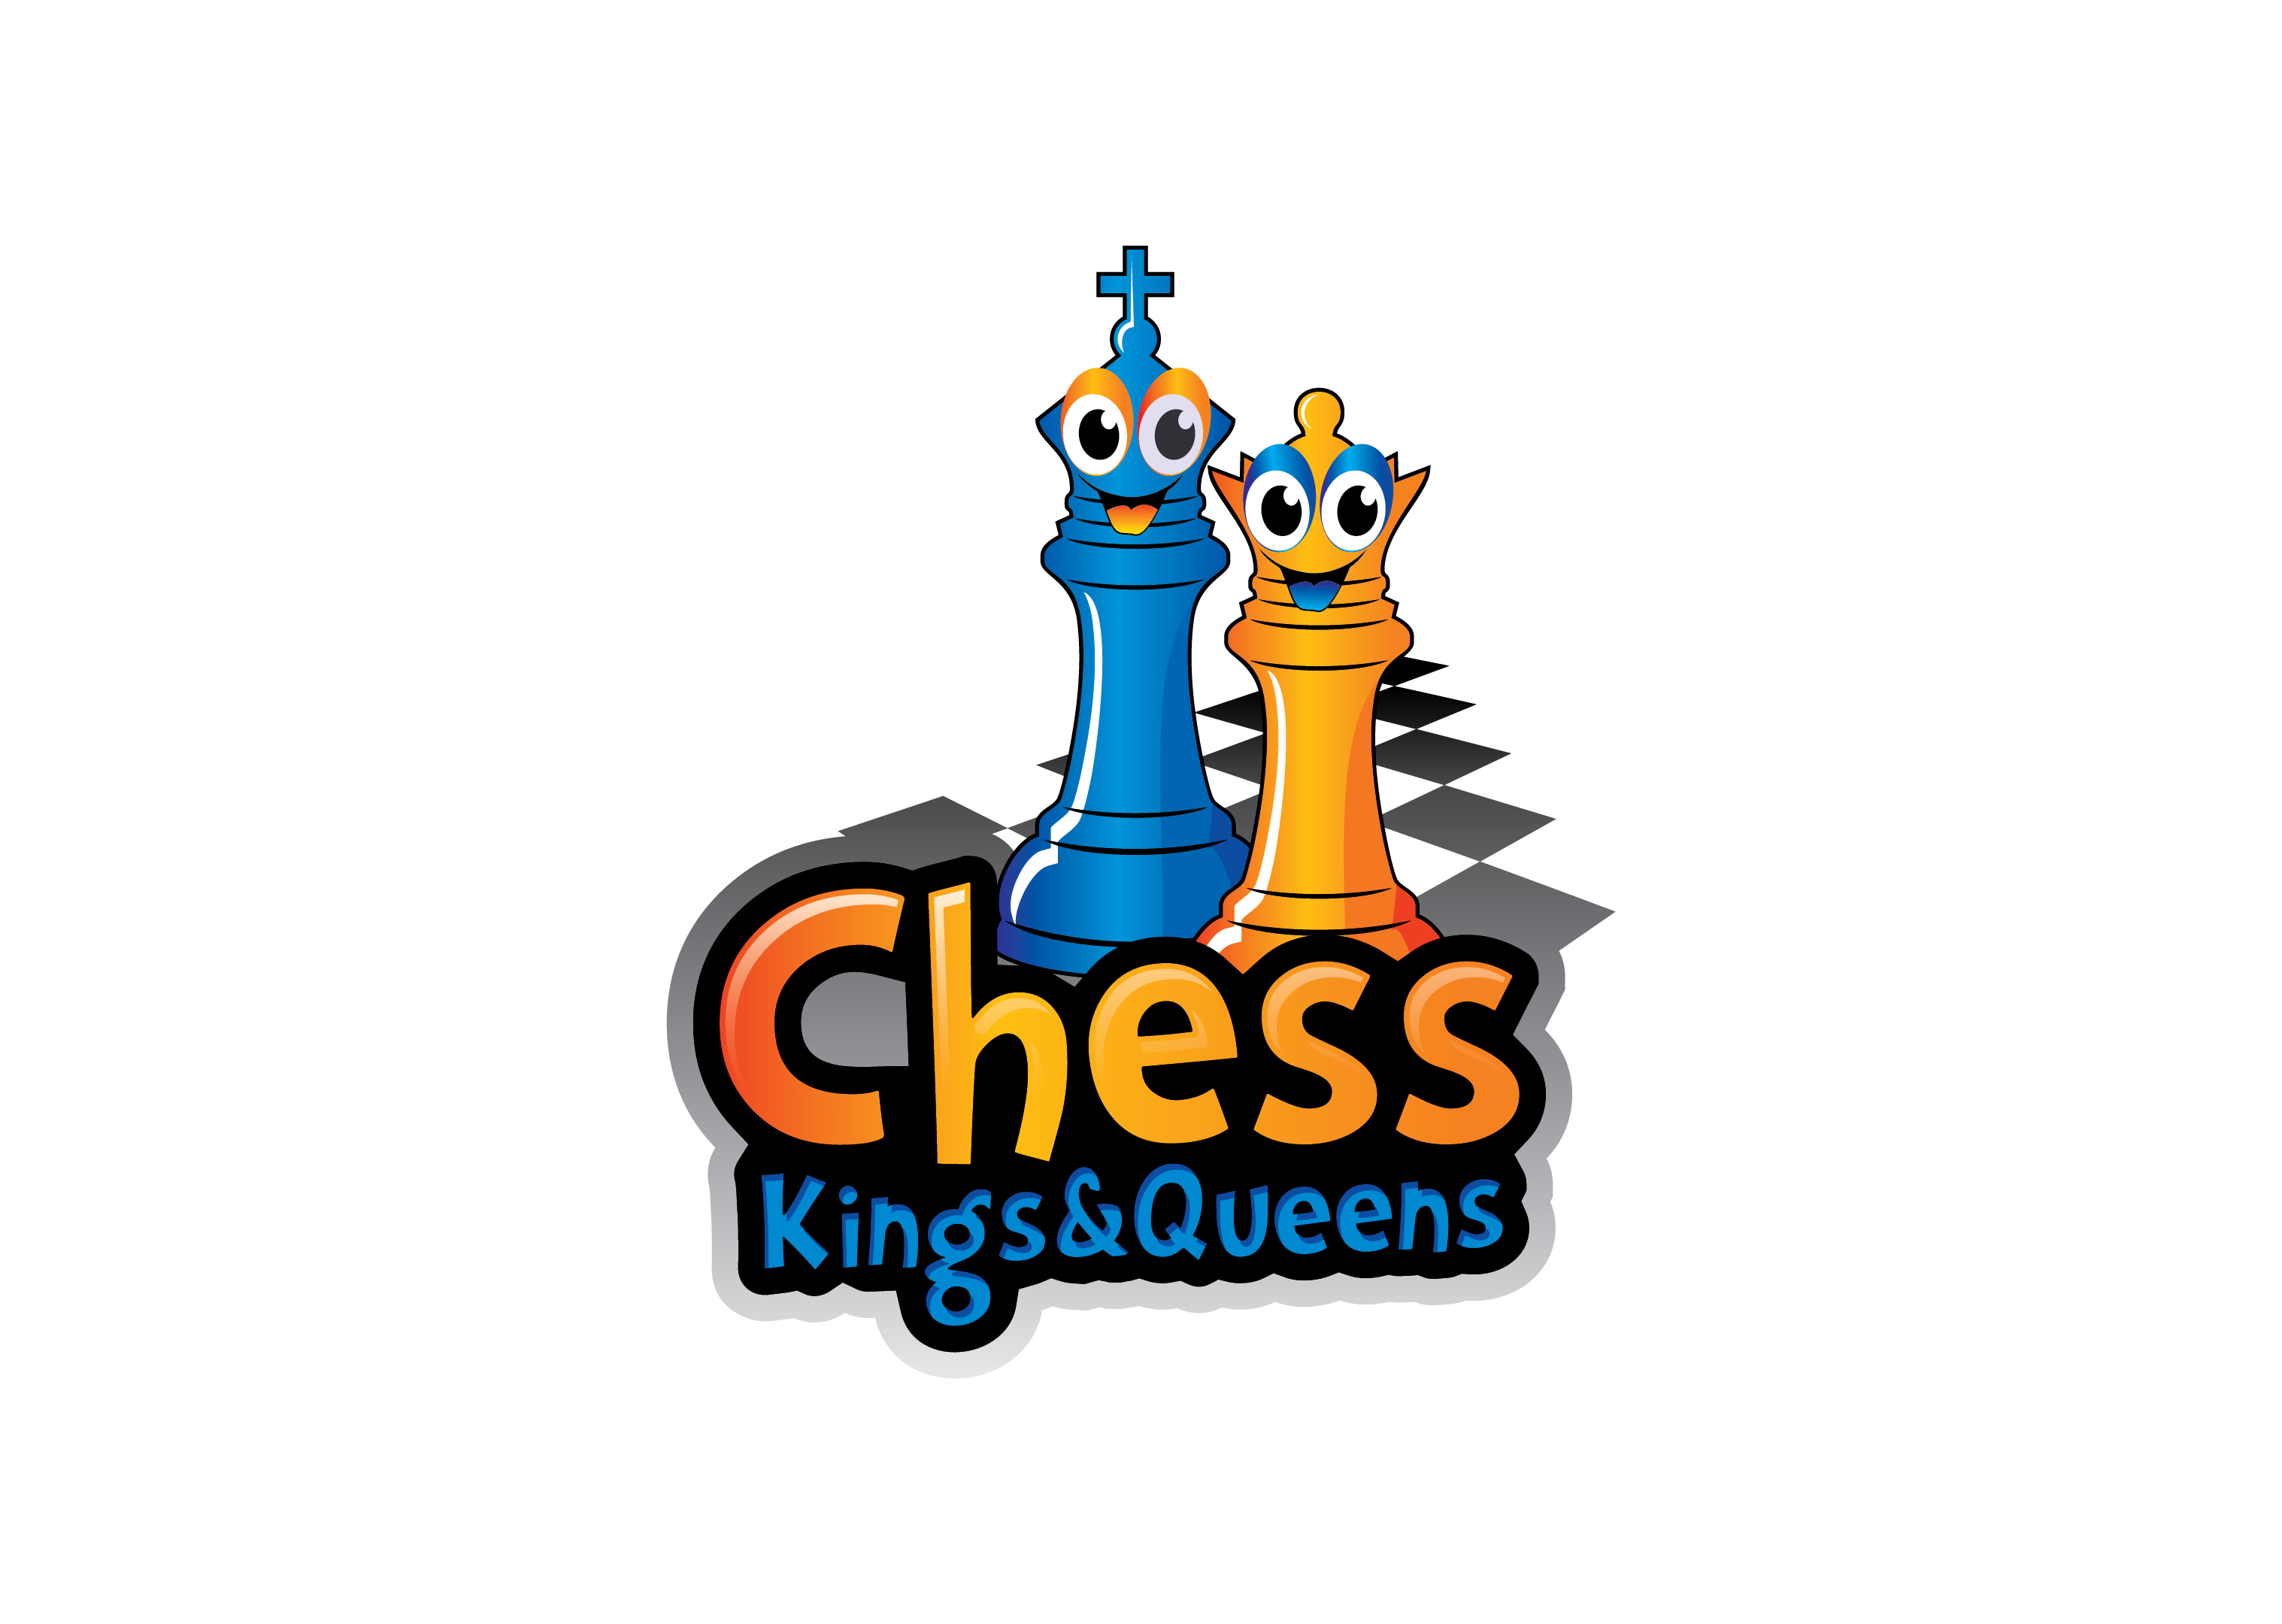 Chess Kings & Queens - Chess (3035x2160)